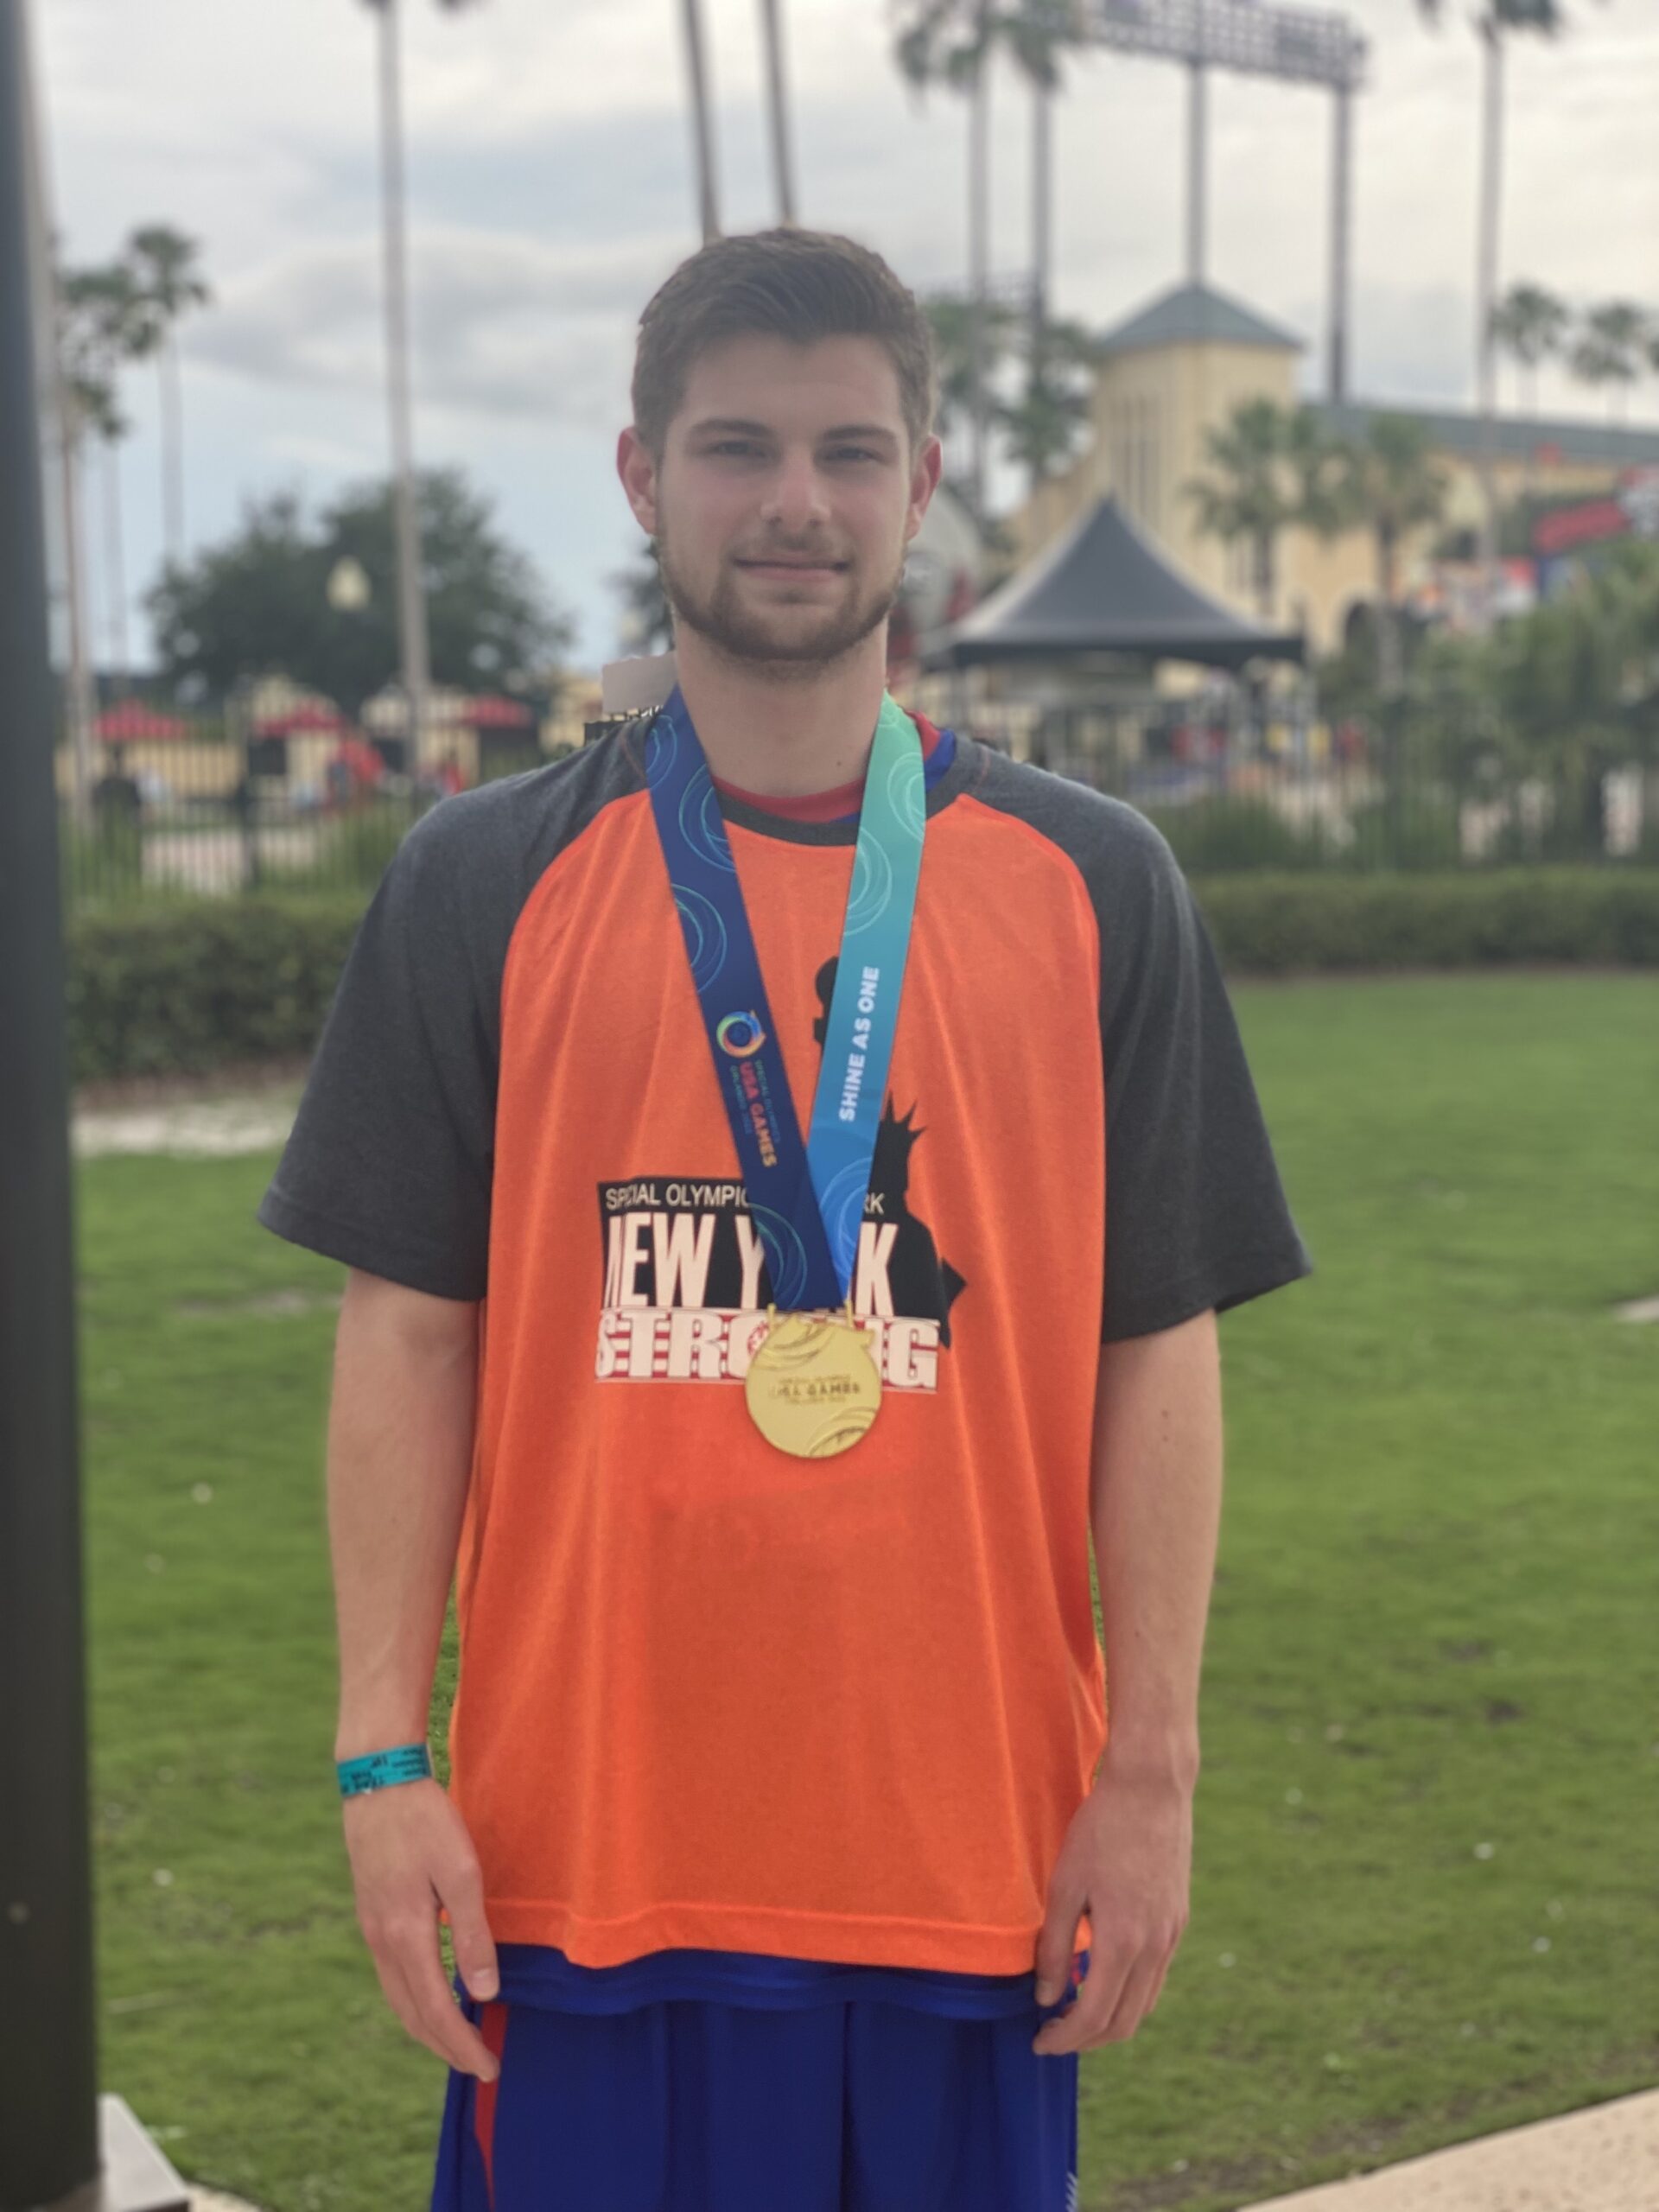 Southampton's Ross Ebrus won the gold medal in the 100-meter dash at the Special Olympics USA Games, held from June 5-10 in Orlando, Florida,